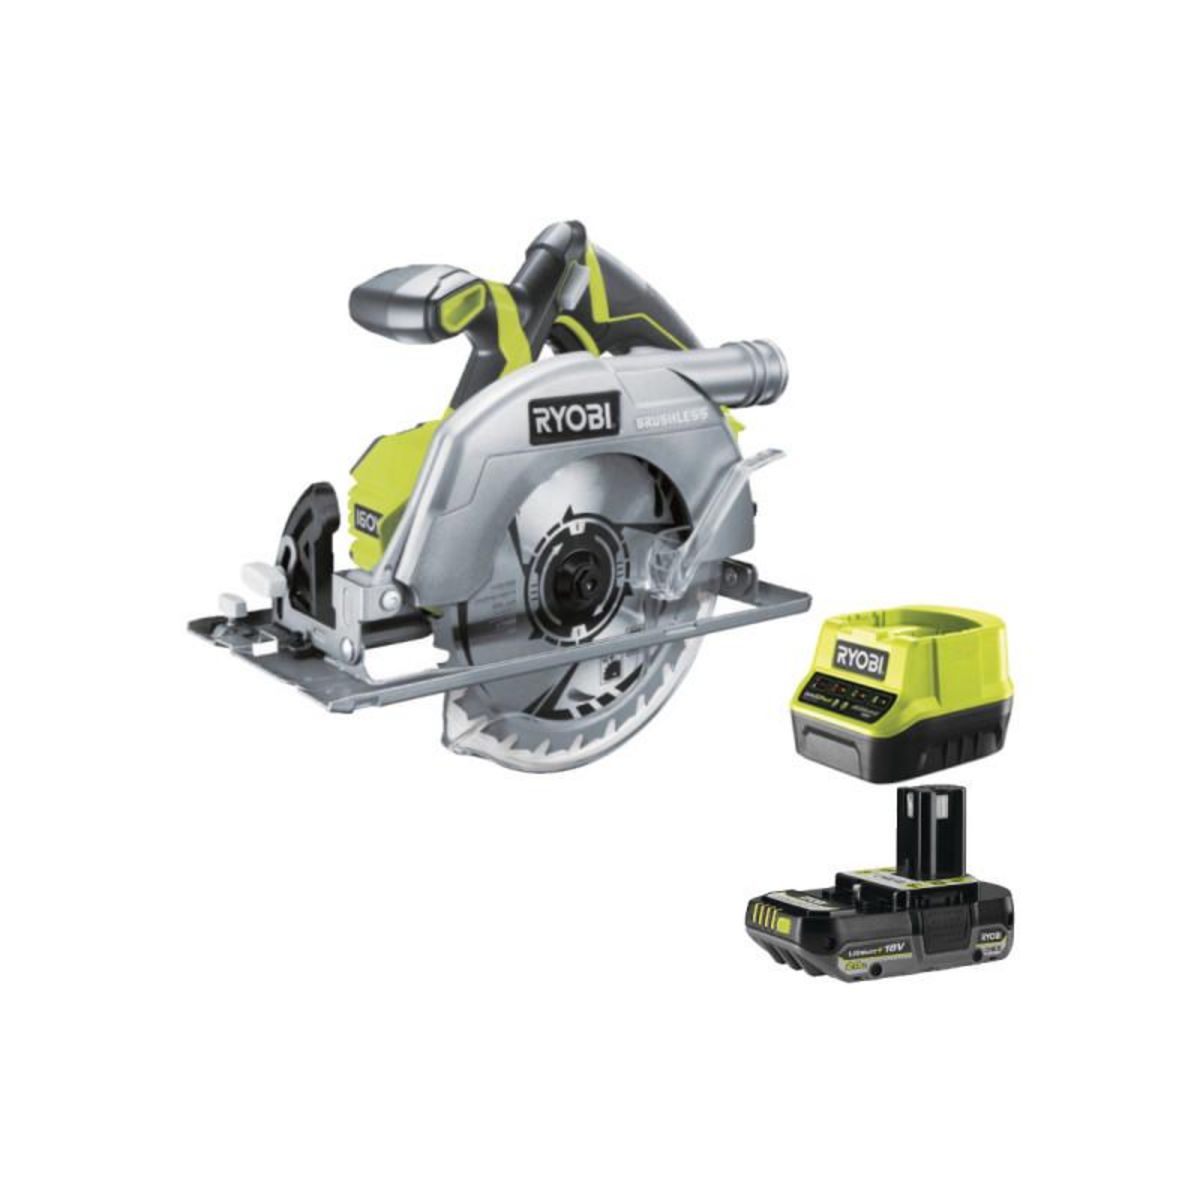 Ryobi Pack RYOBI Scie circulaire R18CS7-0 - 18V OnePlus Brushless - Batterie 2.0Ah - 1 Chargeur rapide cher - Auchan.fr